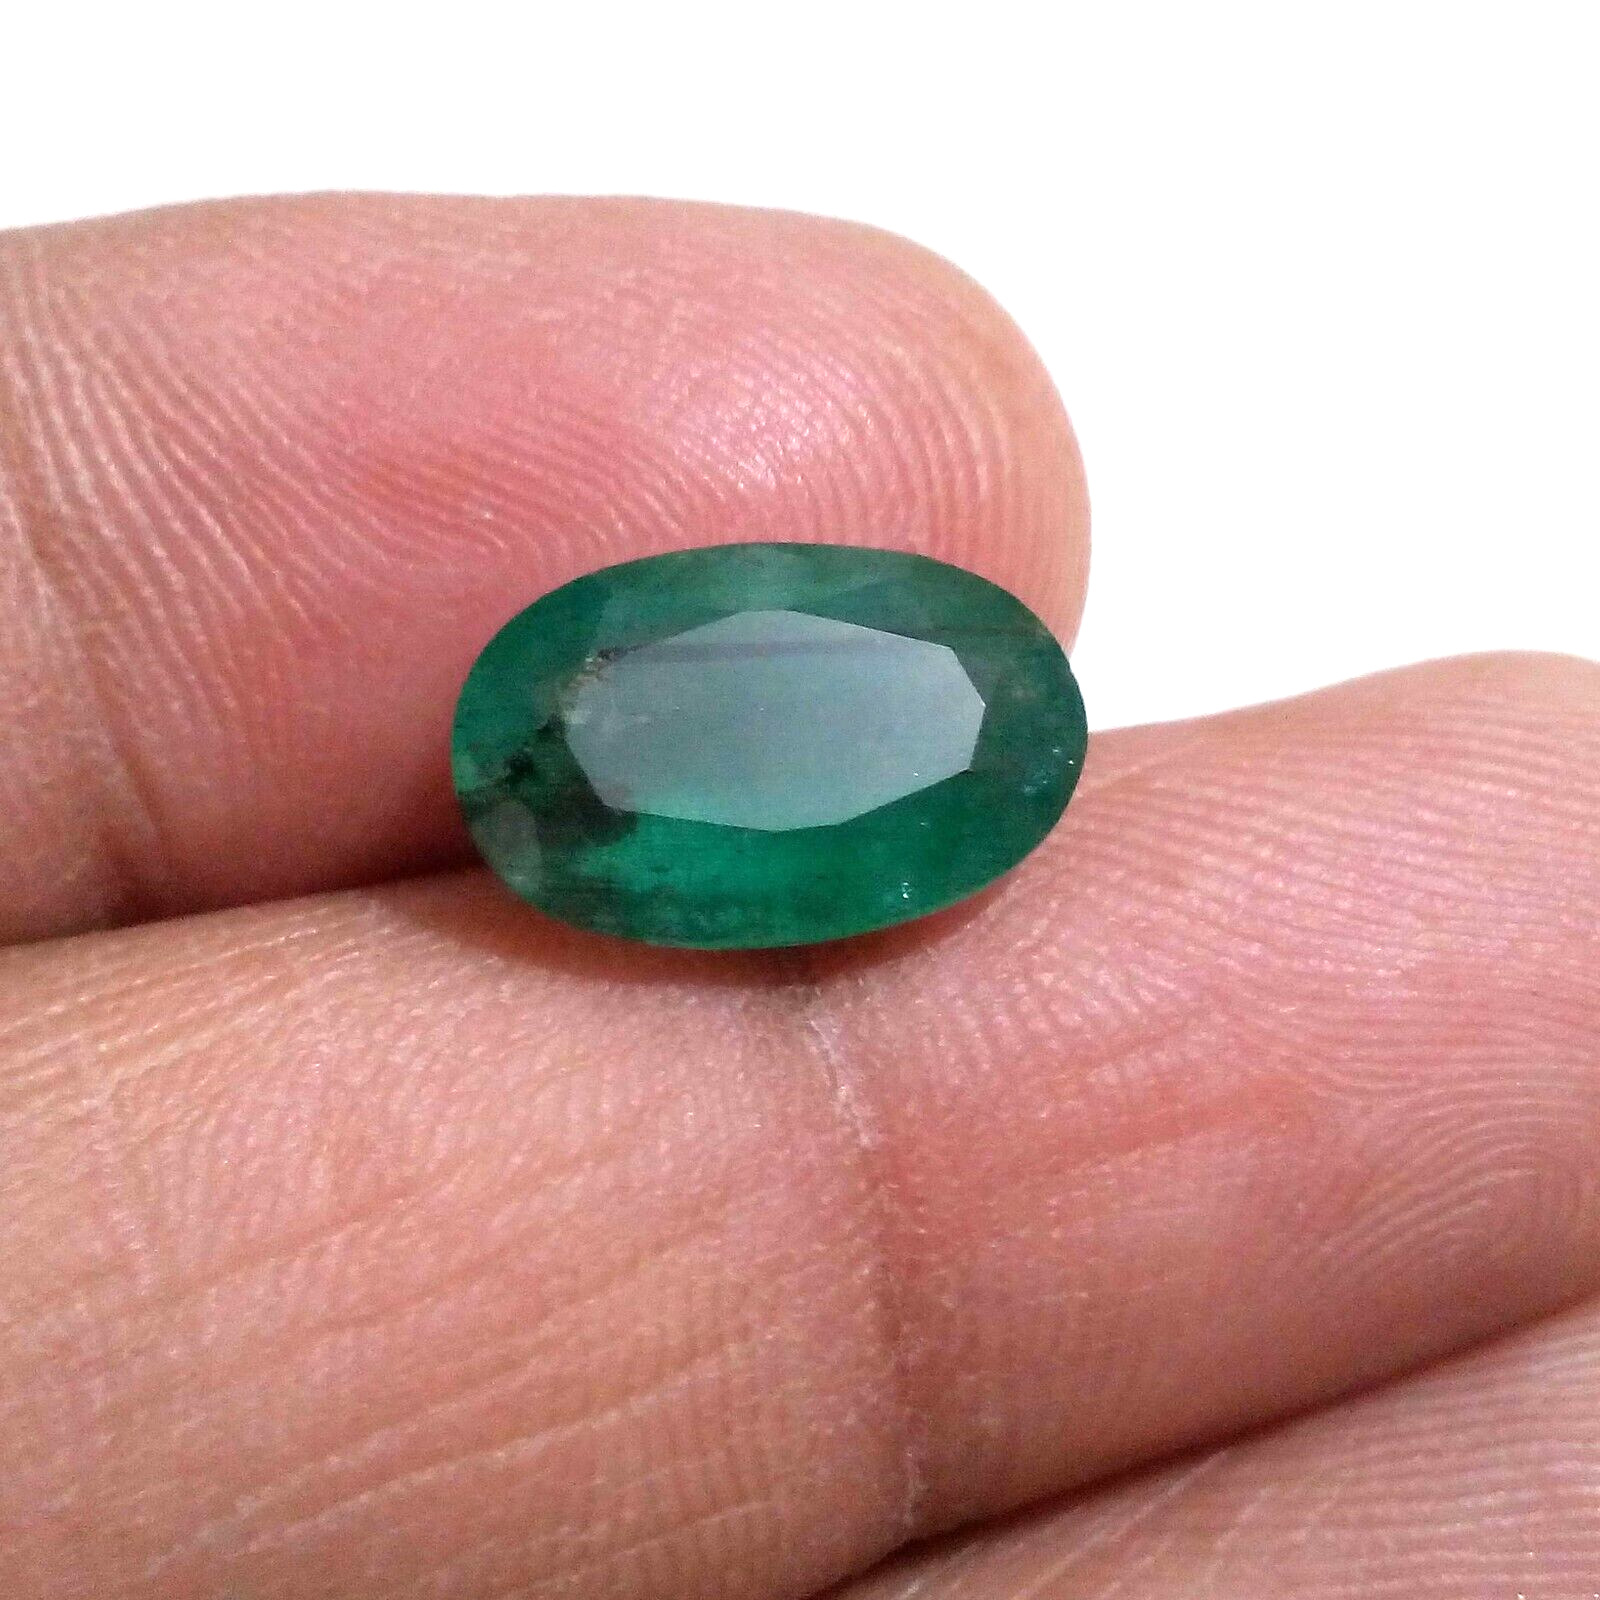 Gorgeous Zambian Emerald Oval Shape 5 Crt Pretty Green Faceted Loose Gemstone